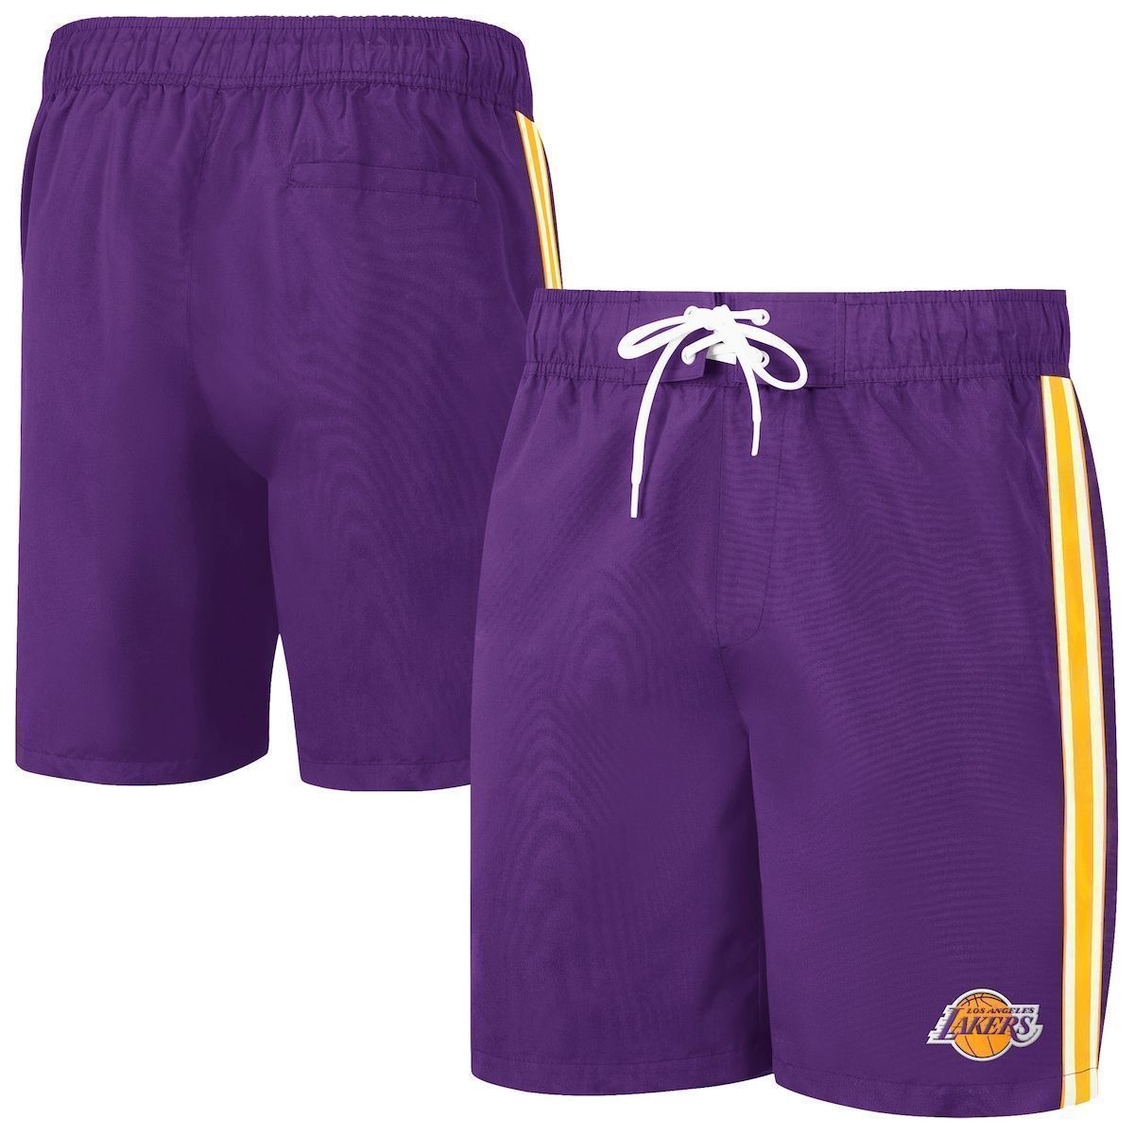 G-III Sports by Carl Banks Men's LA Lakers Sand Beach Volley Swim Shorts - Image 2 of 4